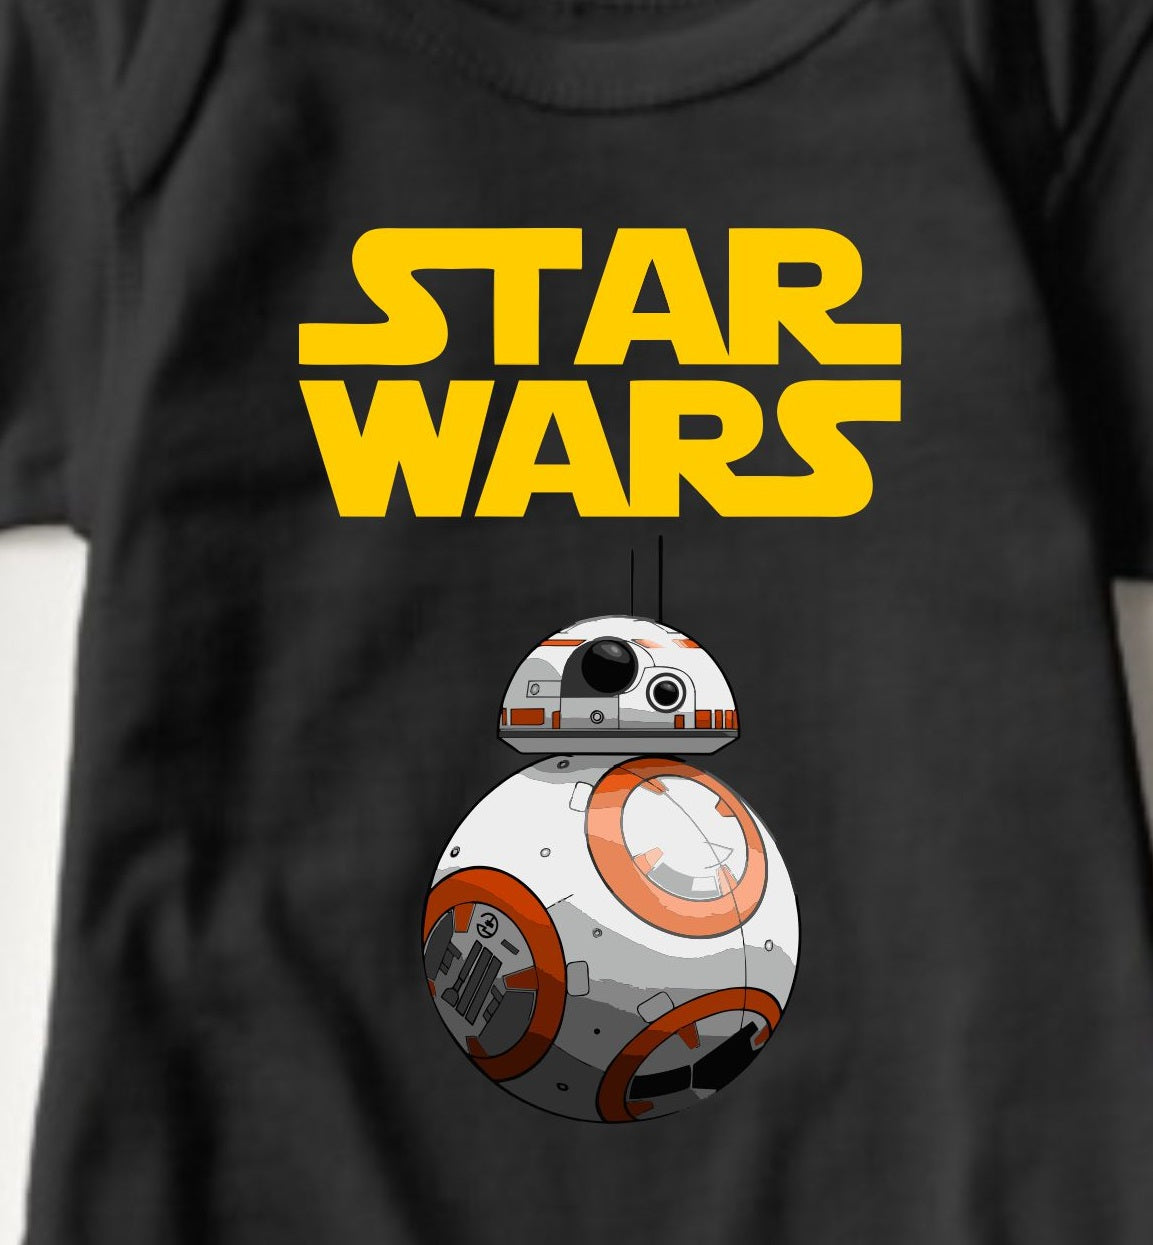 Baby Star Wars Collection Onesies - BB8 - MYSTYLEMYCLOTHING